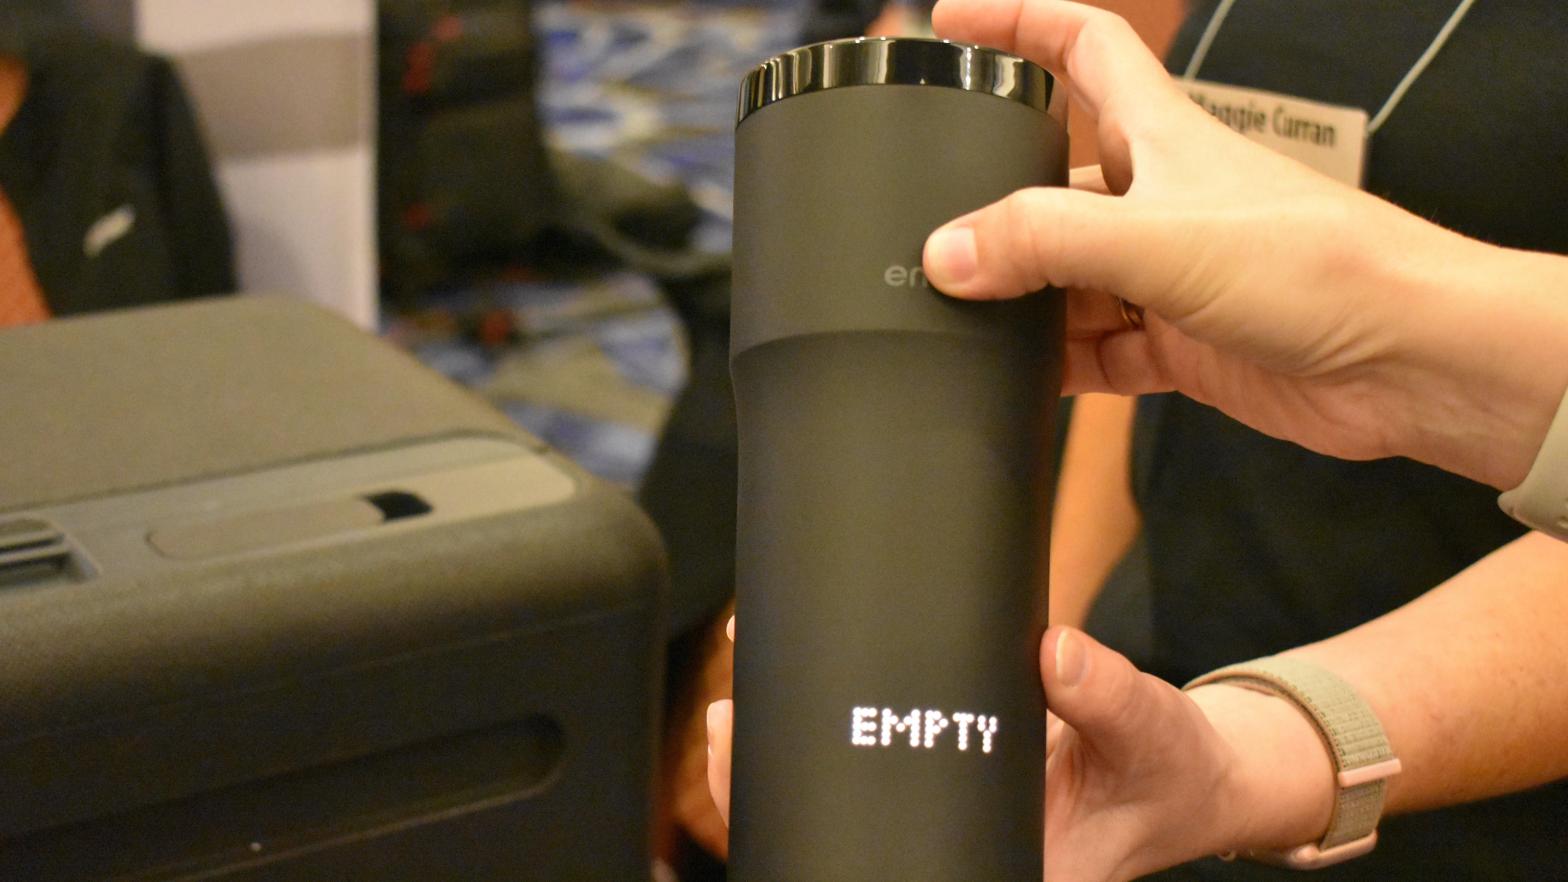 The Travel Mug 2+ also shows when the container is empty, and lets users control the temperature. (Photo: Kyle Barr/Gizmodo)